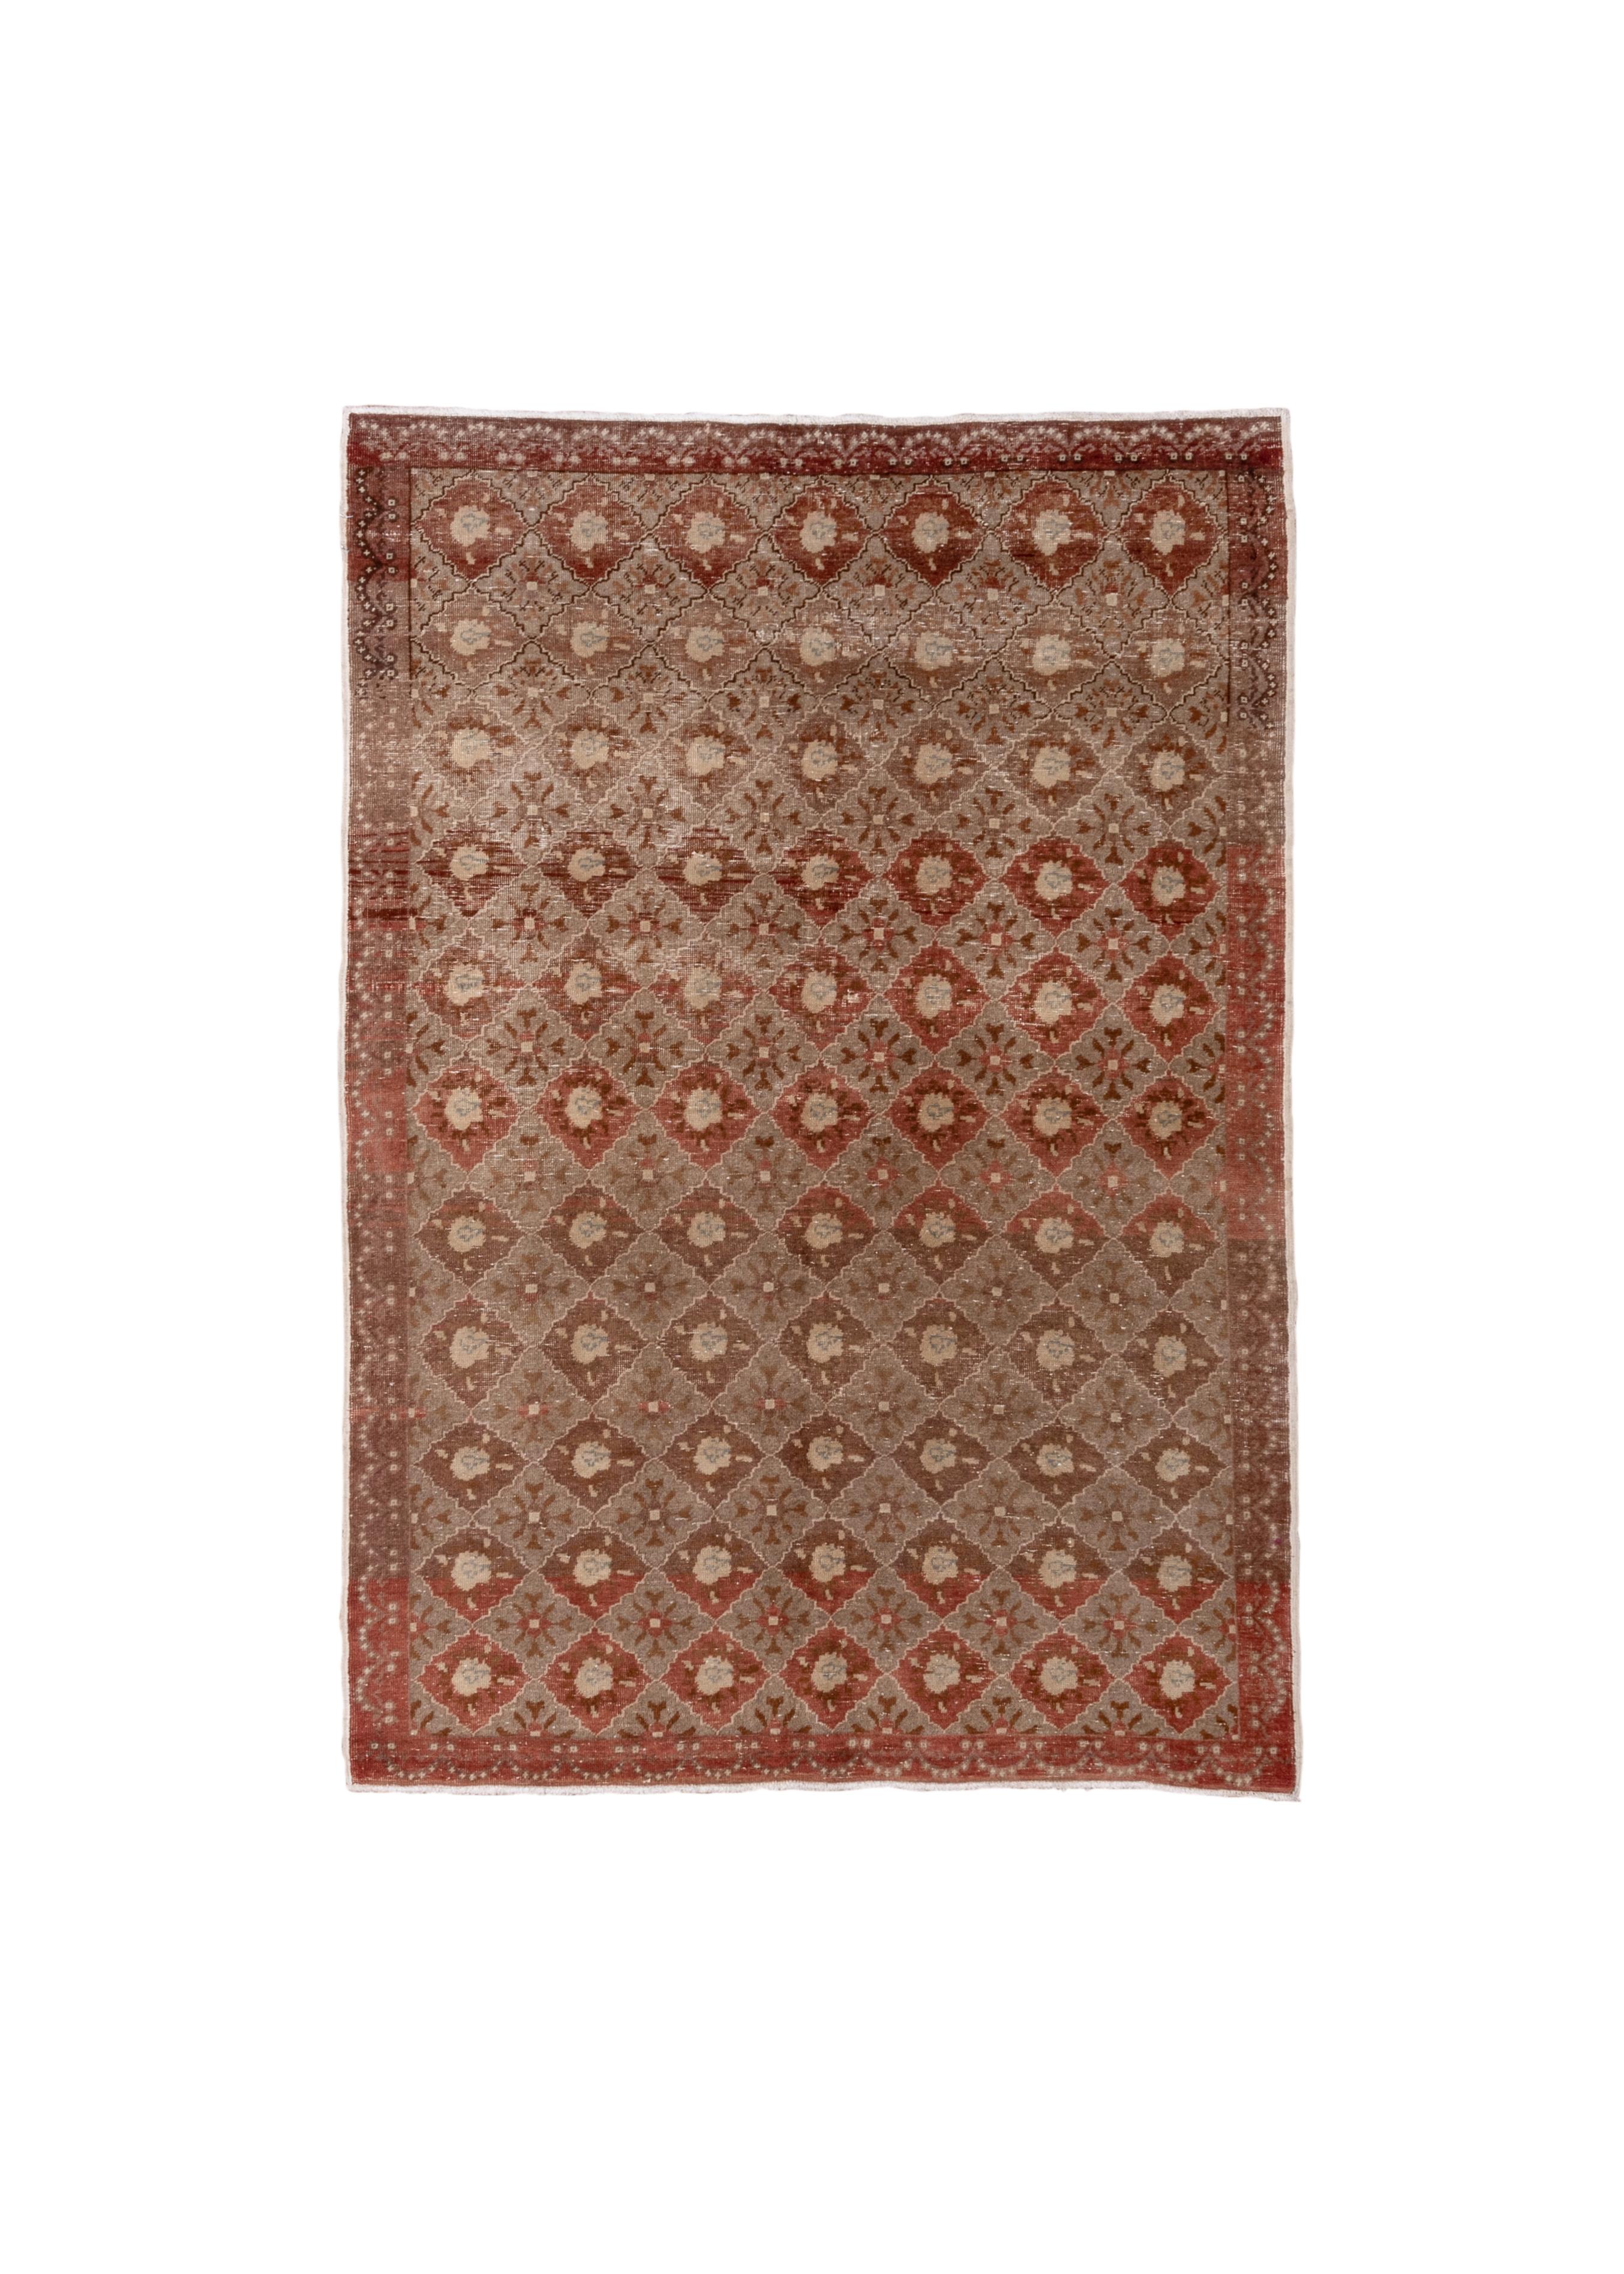 Hand-Knotted Allover Design Vintage Turkish Oushak Rug, Red and Brown Palette, circa 1950s For Sale